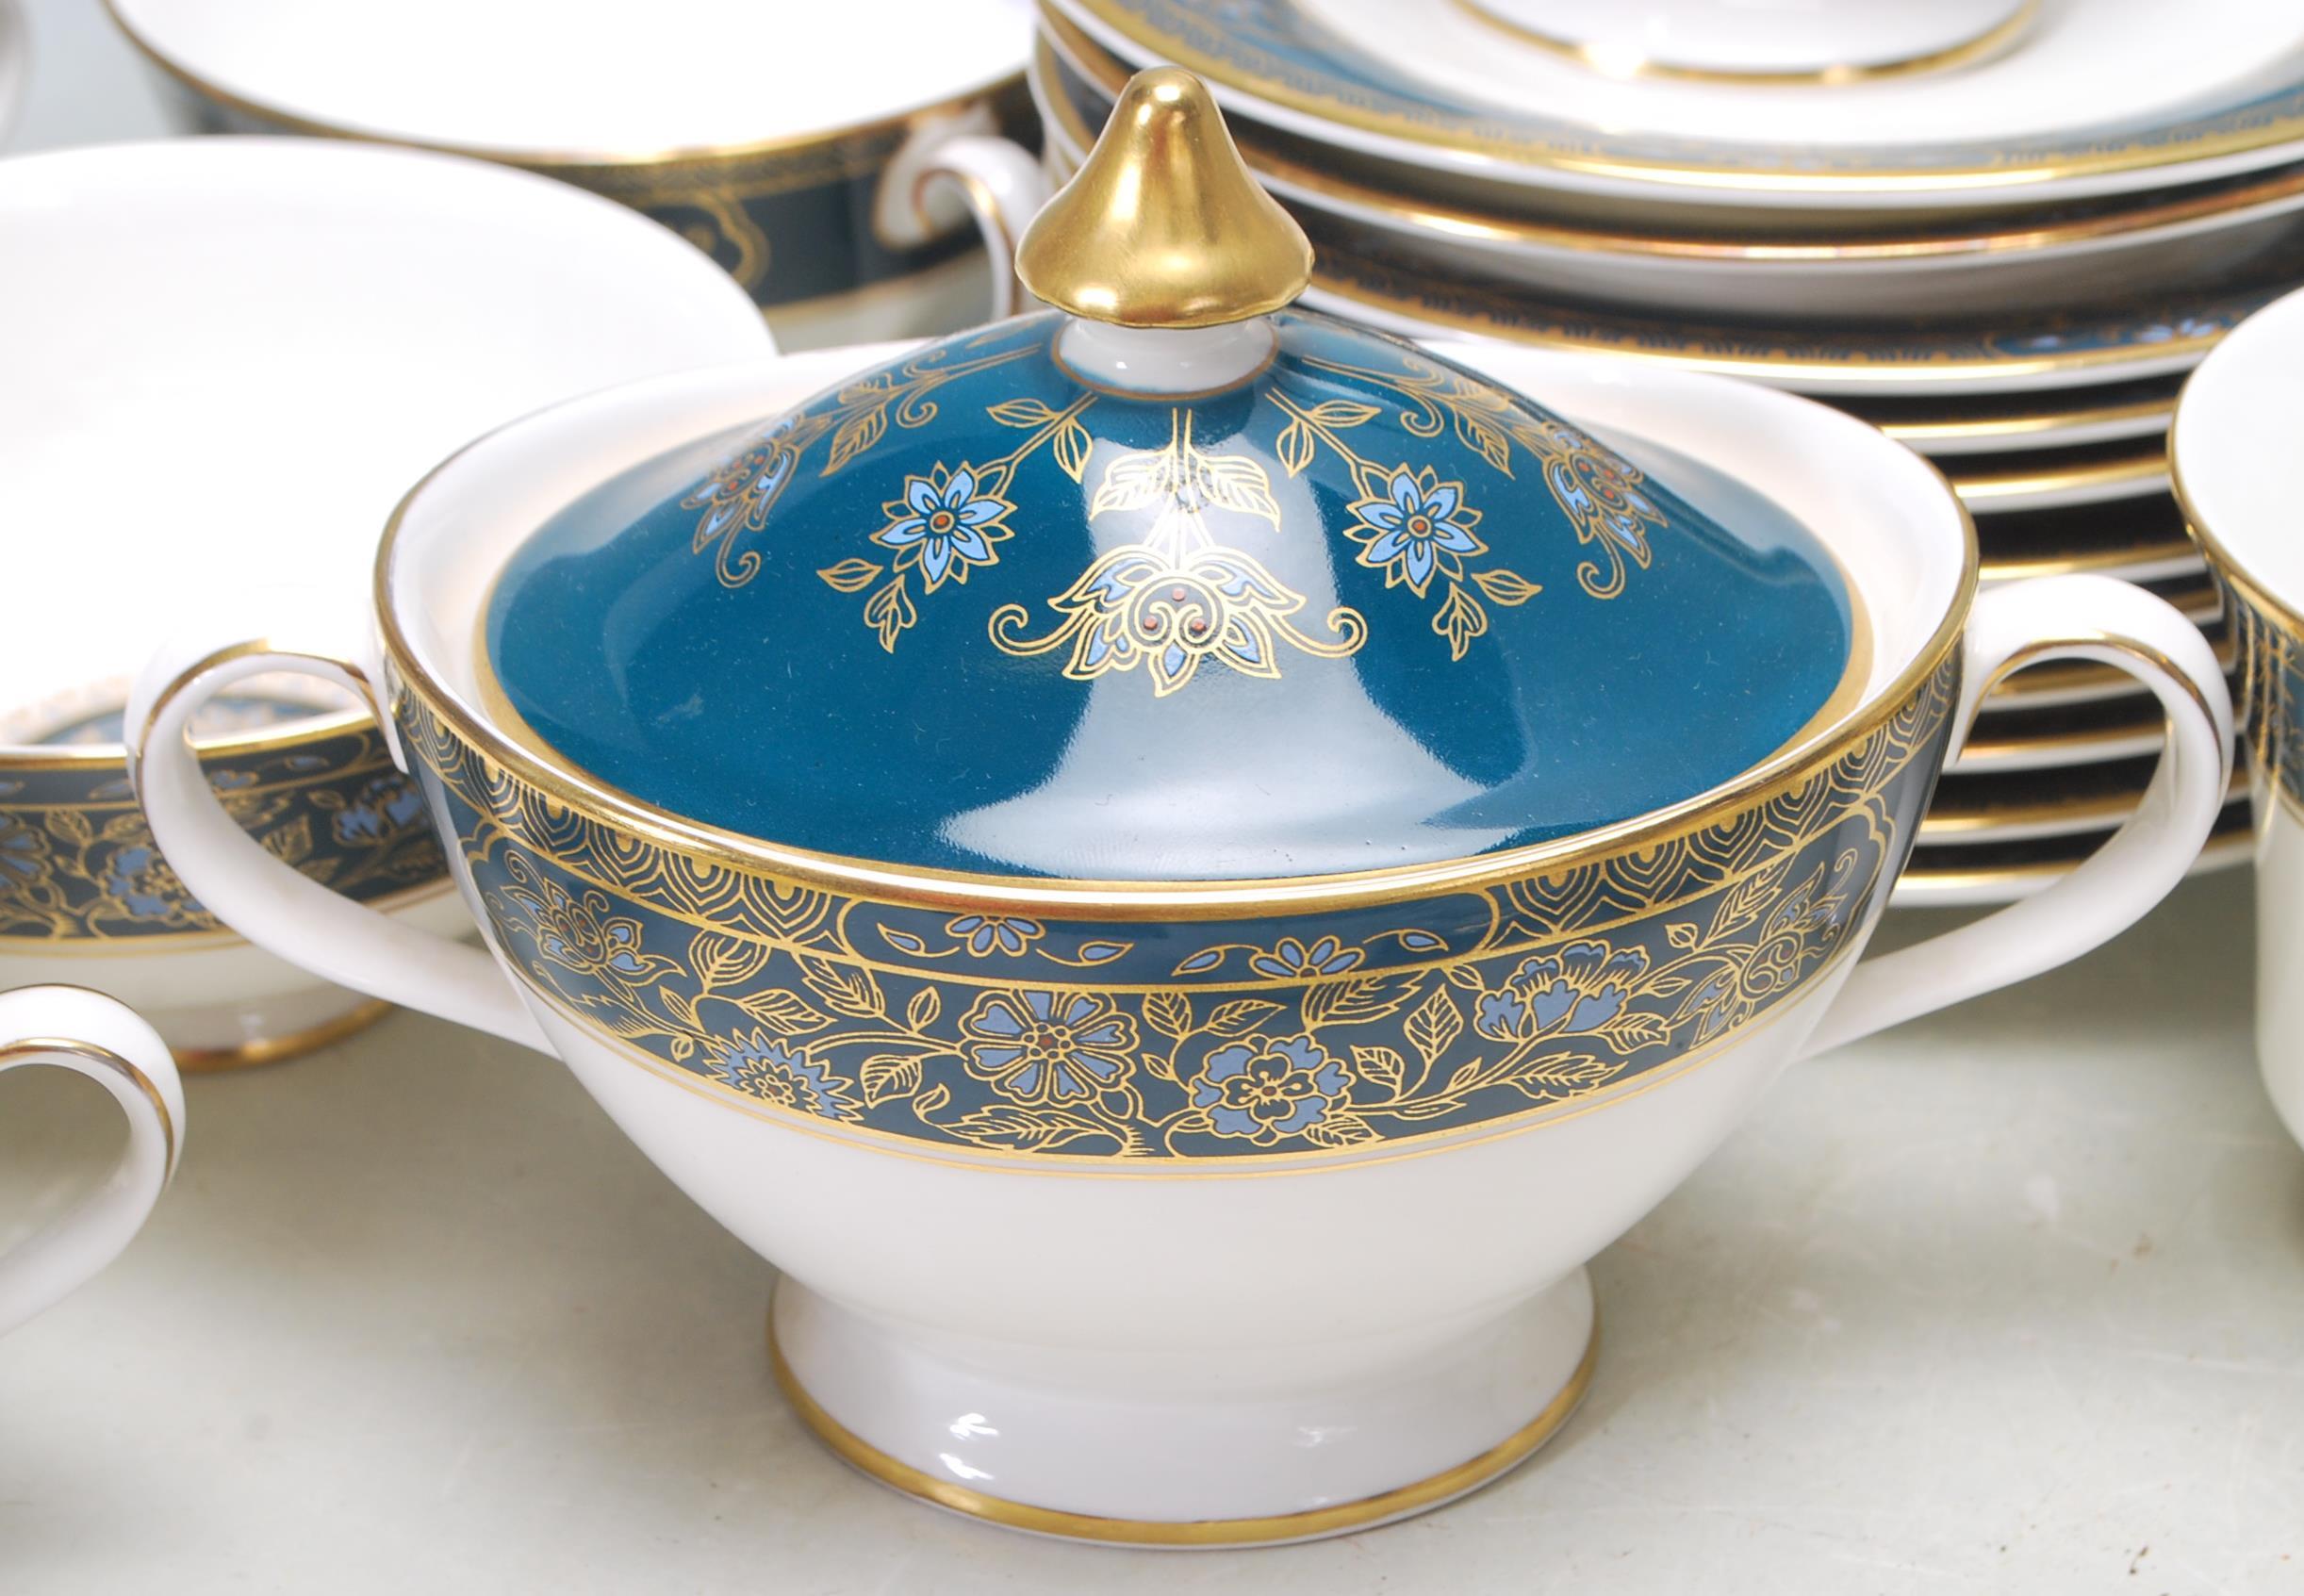 COLLECTION OF LATE 20TH CENTORUY ROYAL DOULTON FINE BONE CHINA DINNER SERVICE - Image 5 of 8